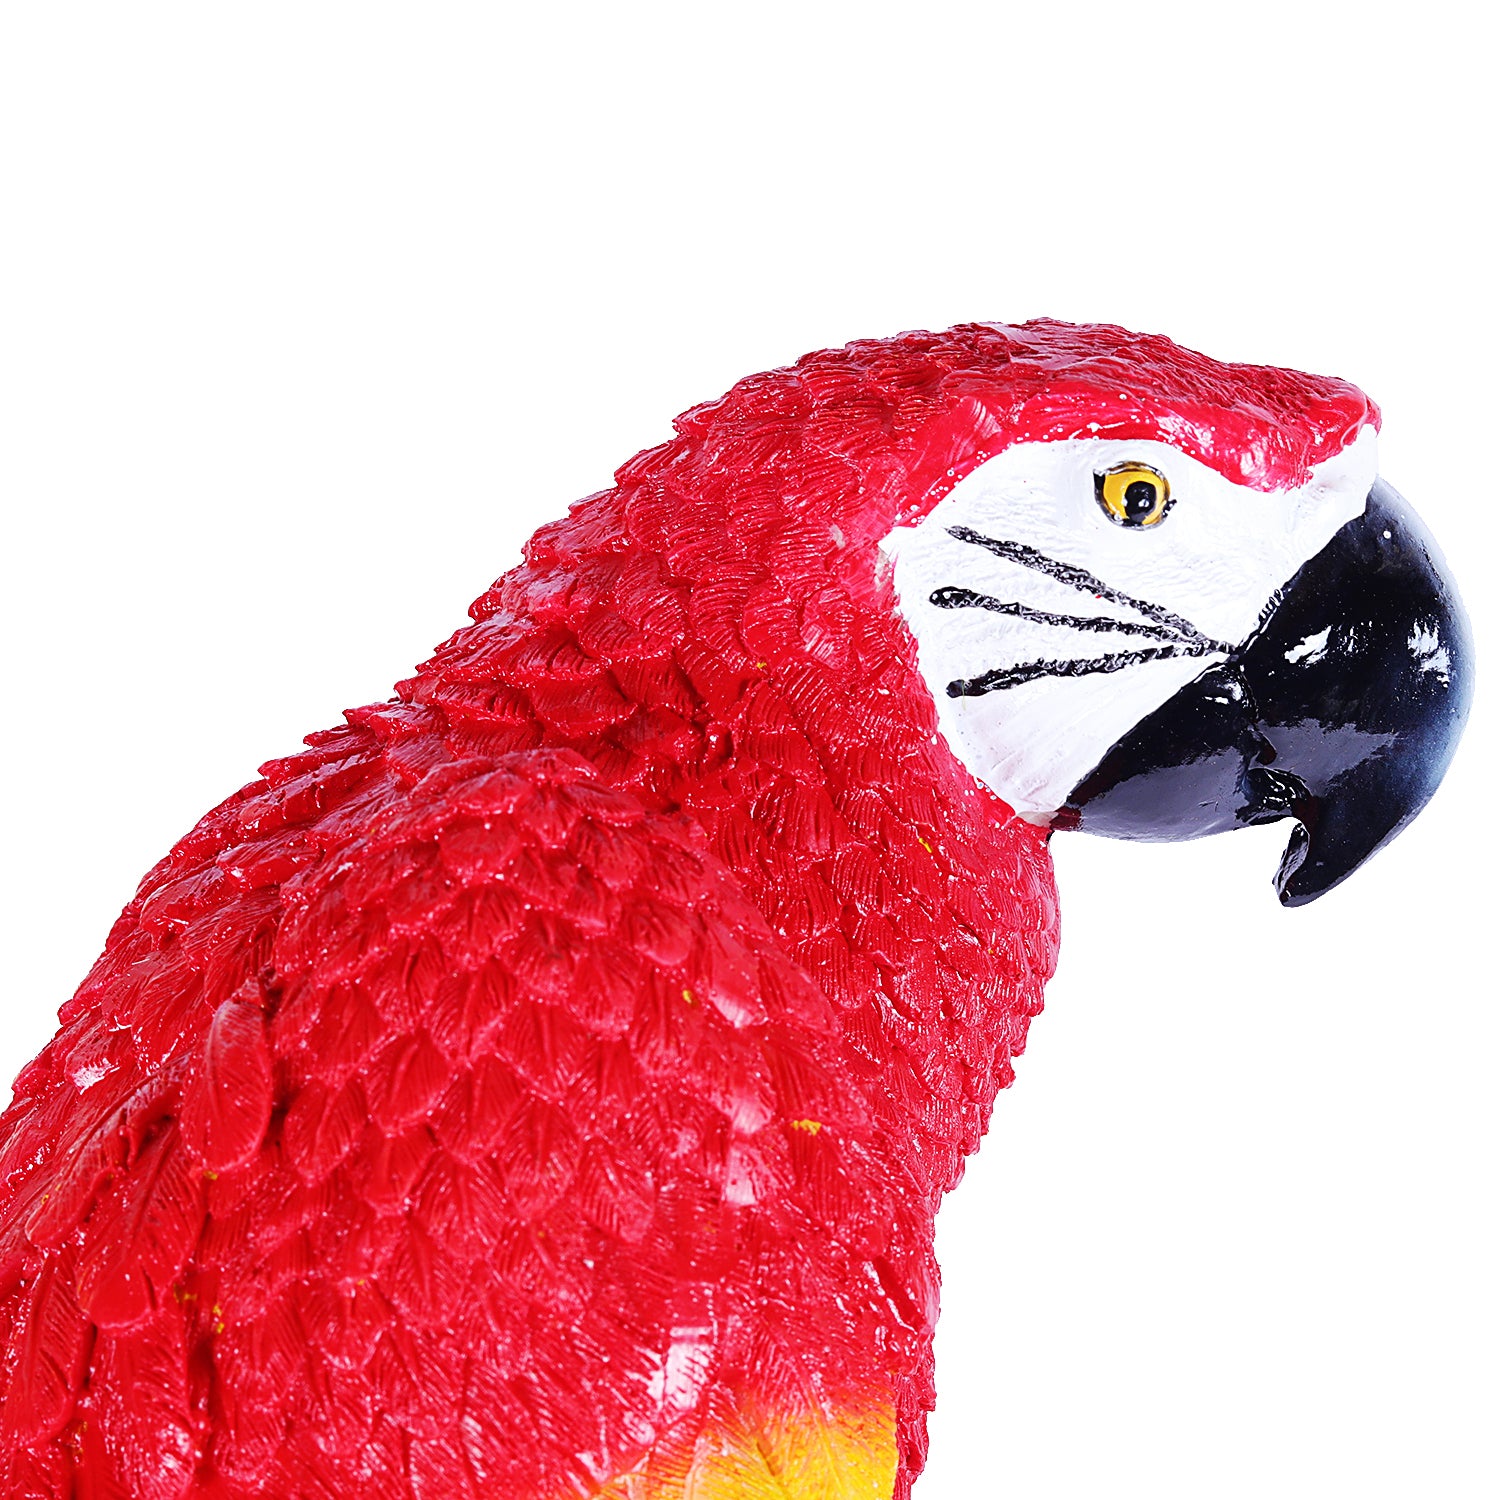 Red Parrot Decor In Red - myBageecha